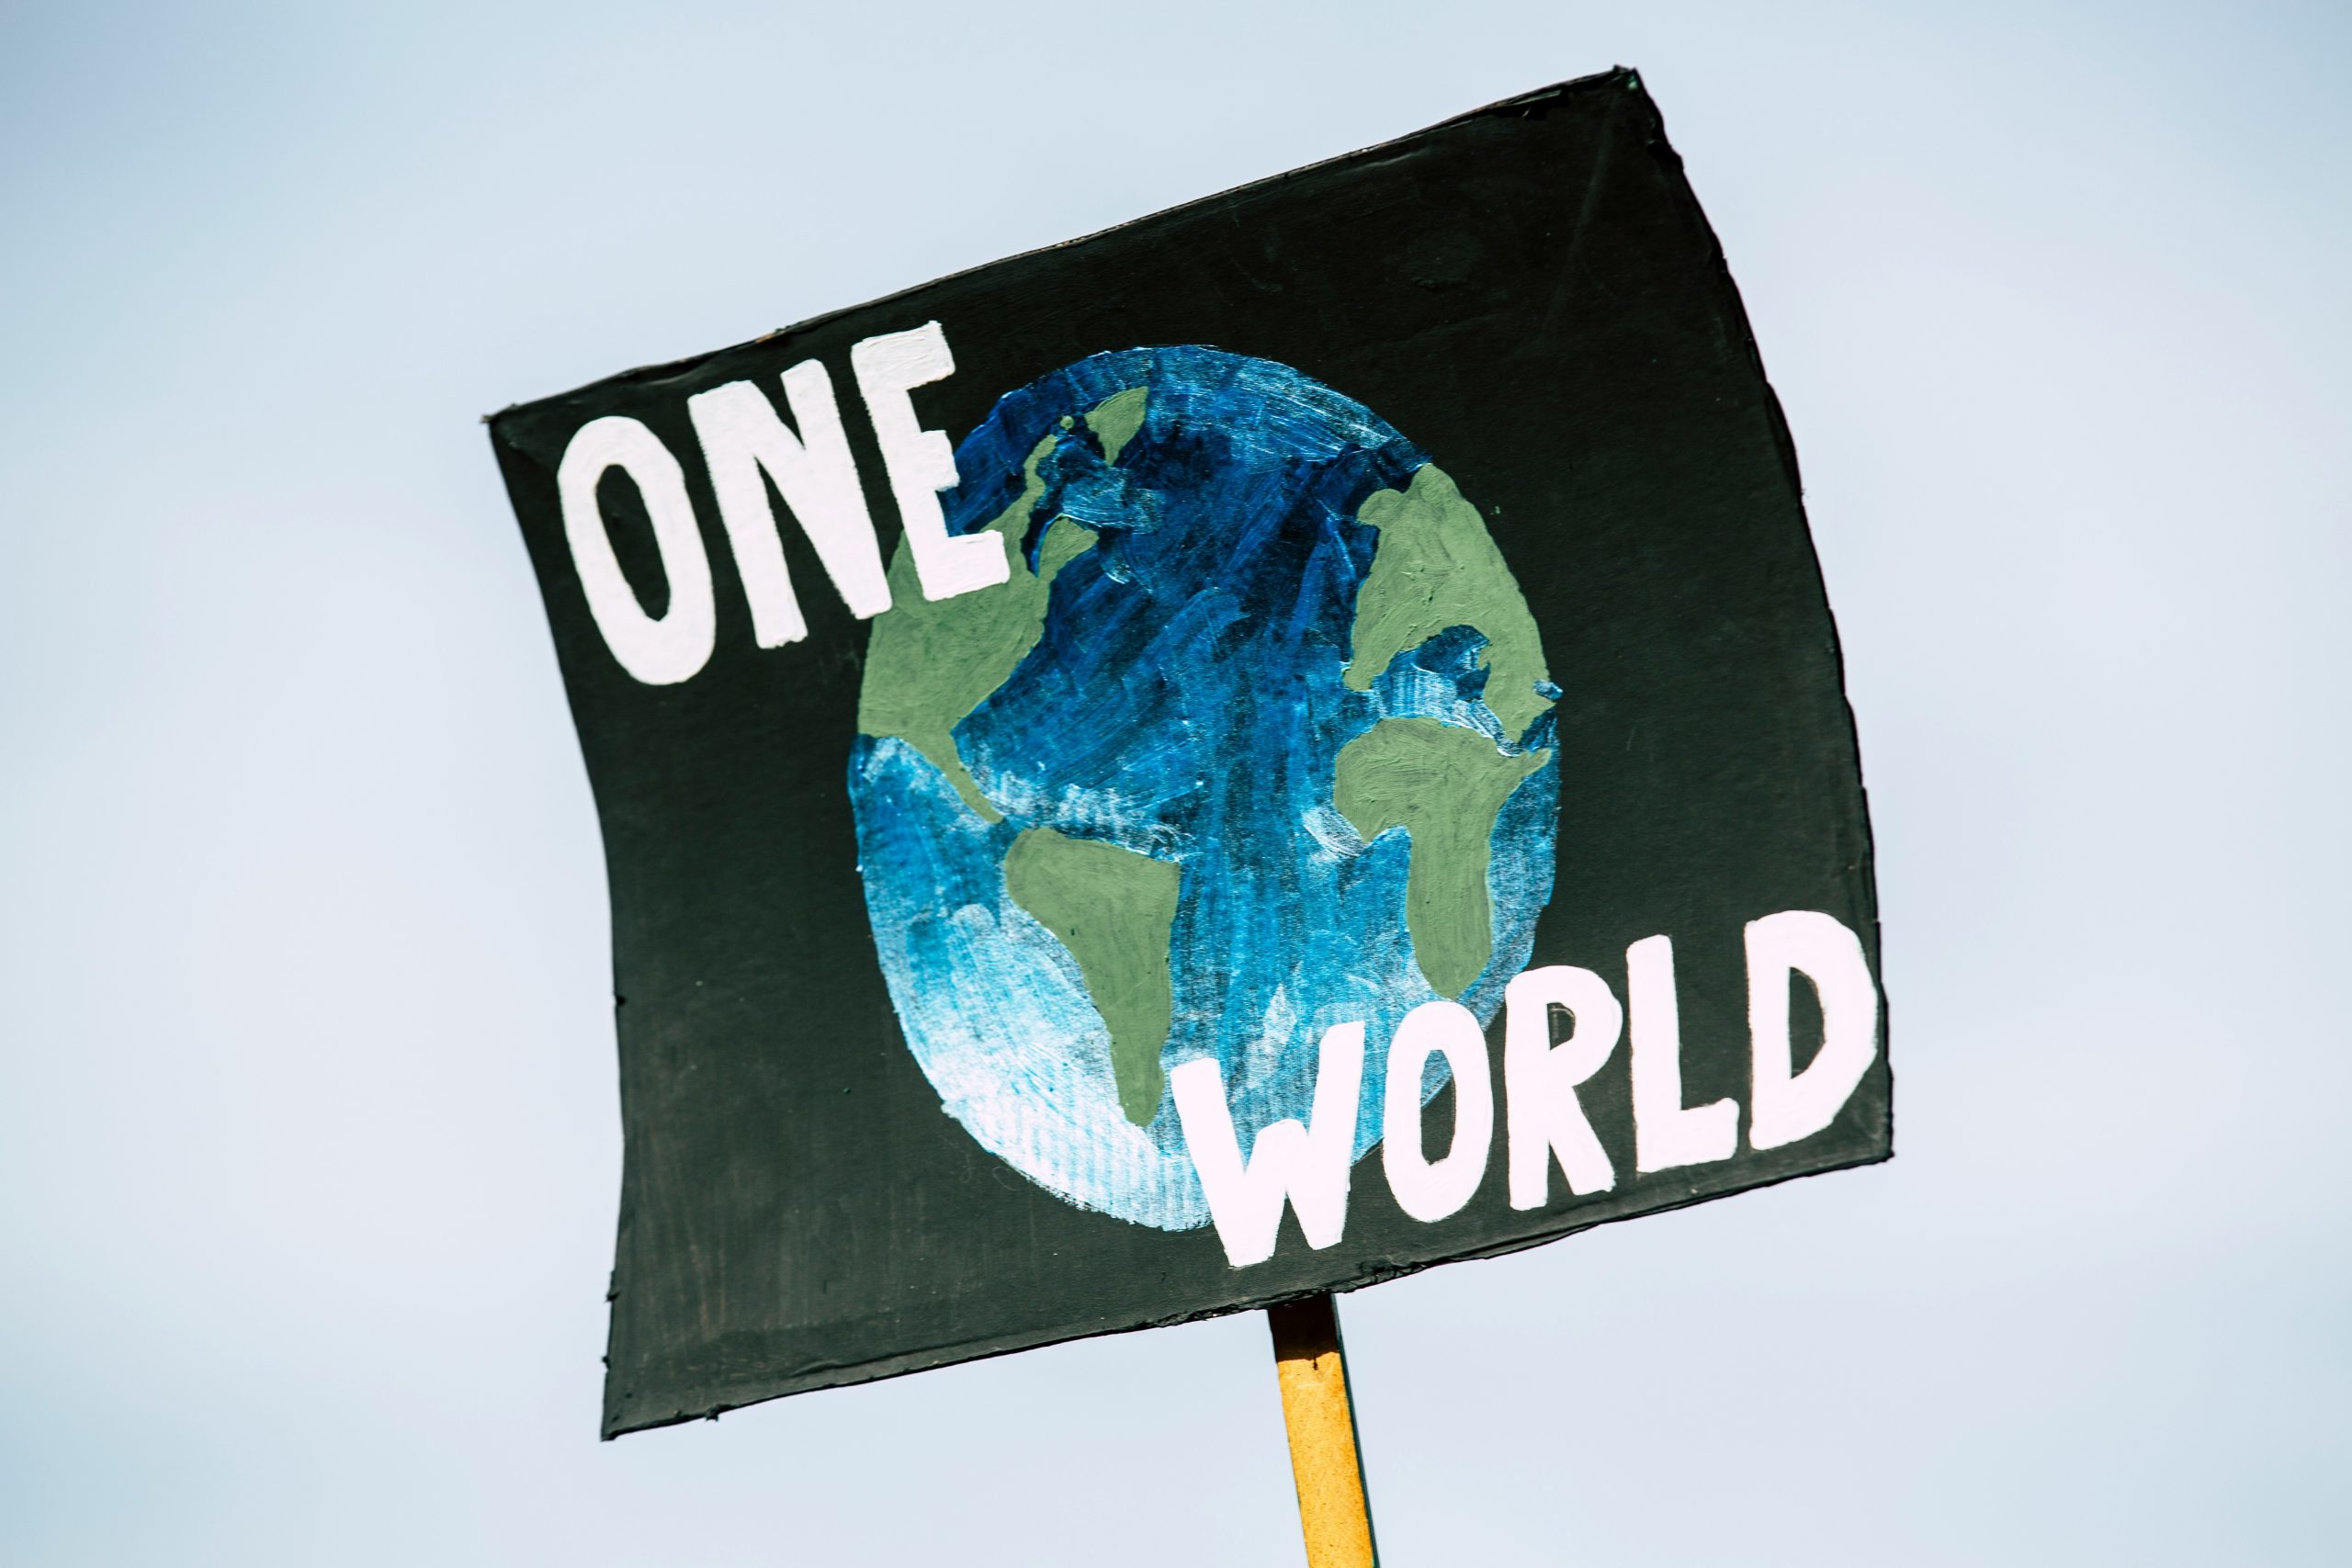 A raised banner stating "ONE WORLD"